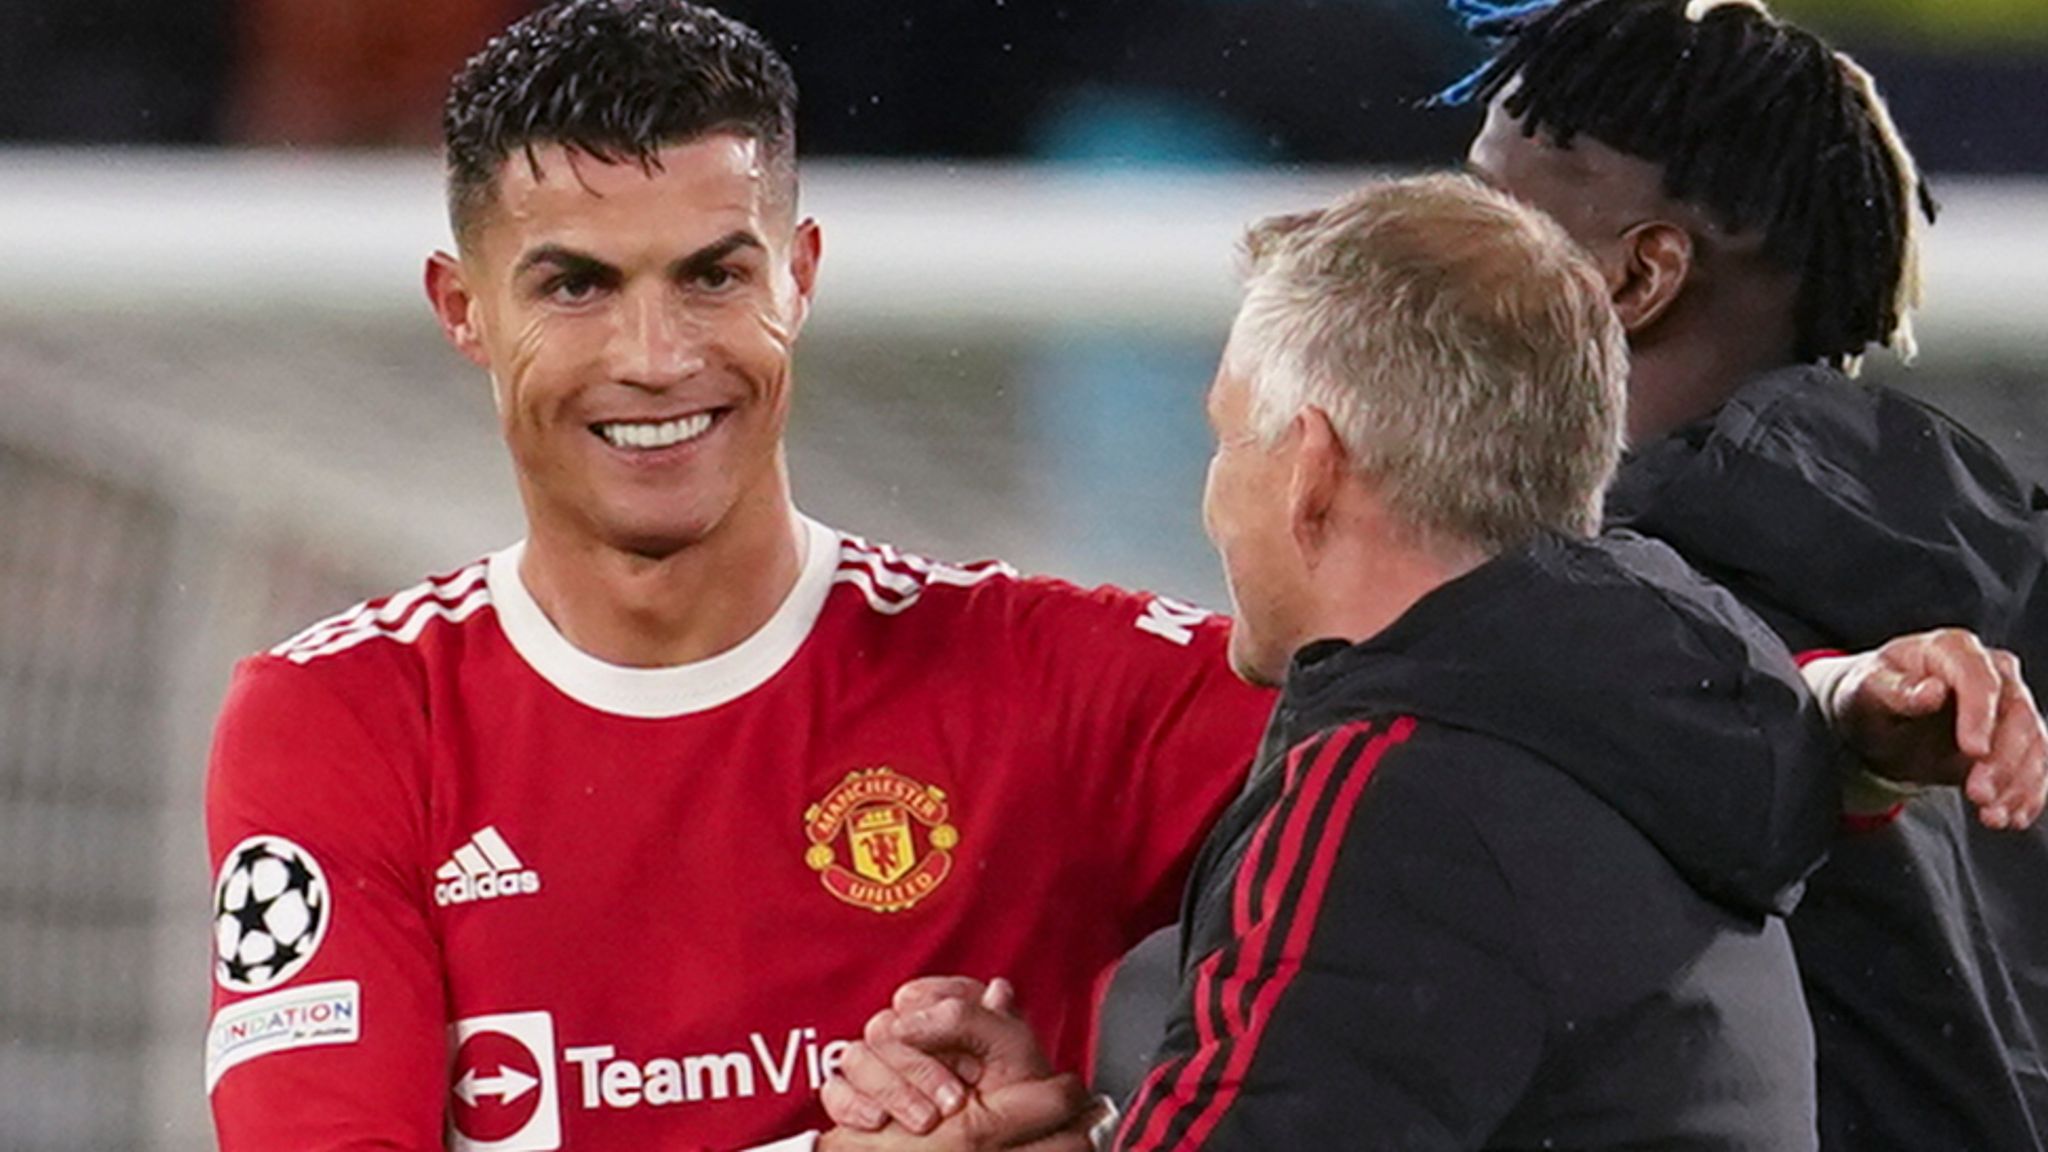 Champions League hits and misses: Cristiano Ronaldo makes up for Manchester United weaknesses, while Chelsea miss a creative spark at Juventus | Football News | Sky Sports